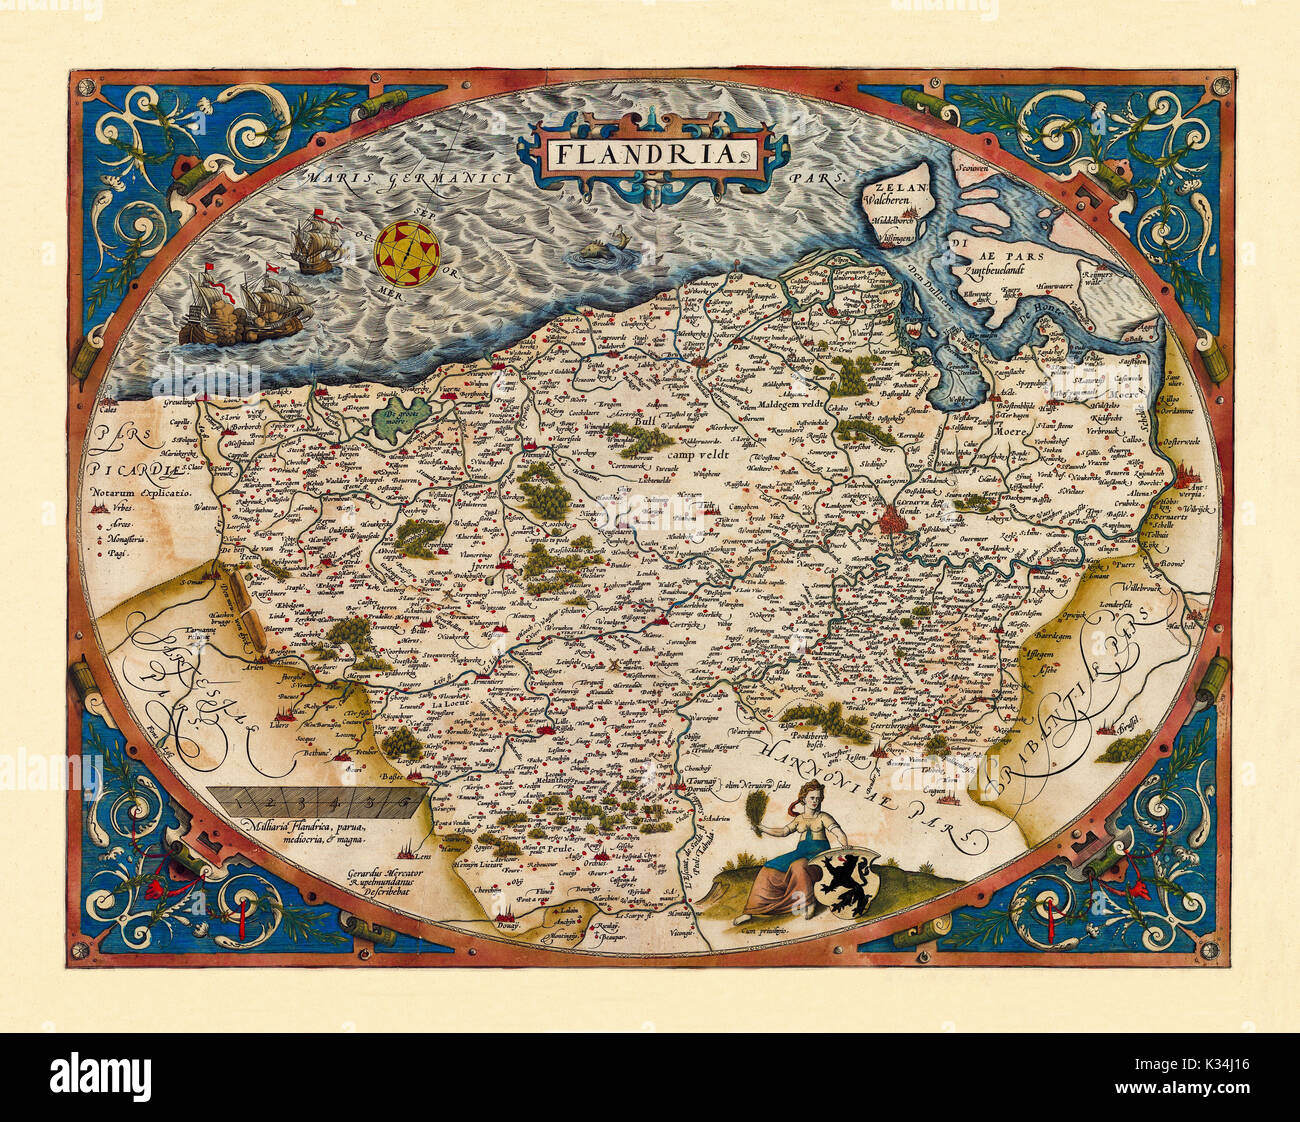 Old map of Belgium. Excellent state of preservation realized in ancient style. All the graphic composition is inside a oval frame. By Ortelius, Theatrum Orbis Terrarum, Antwerp, 1570 Stock Photo